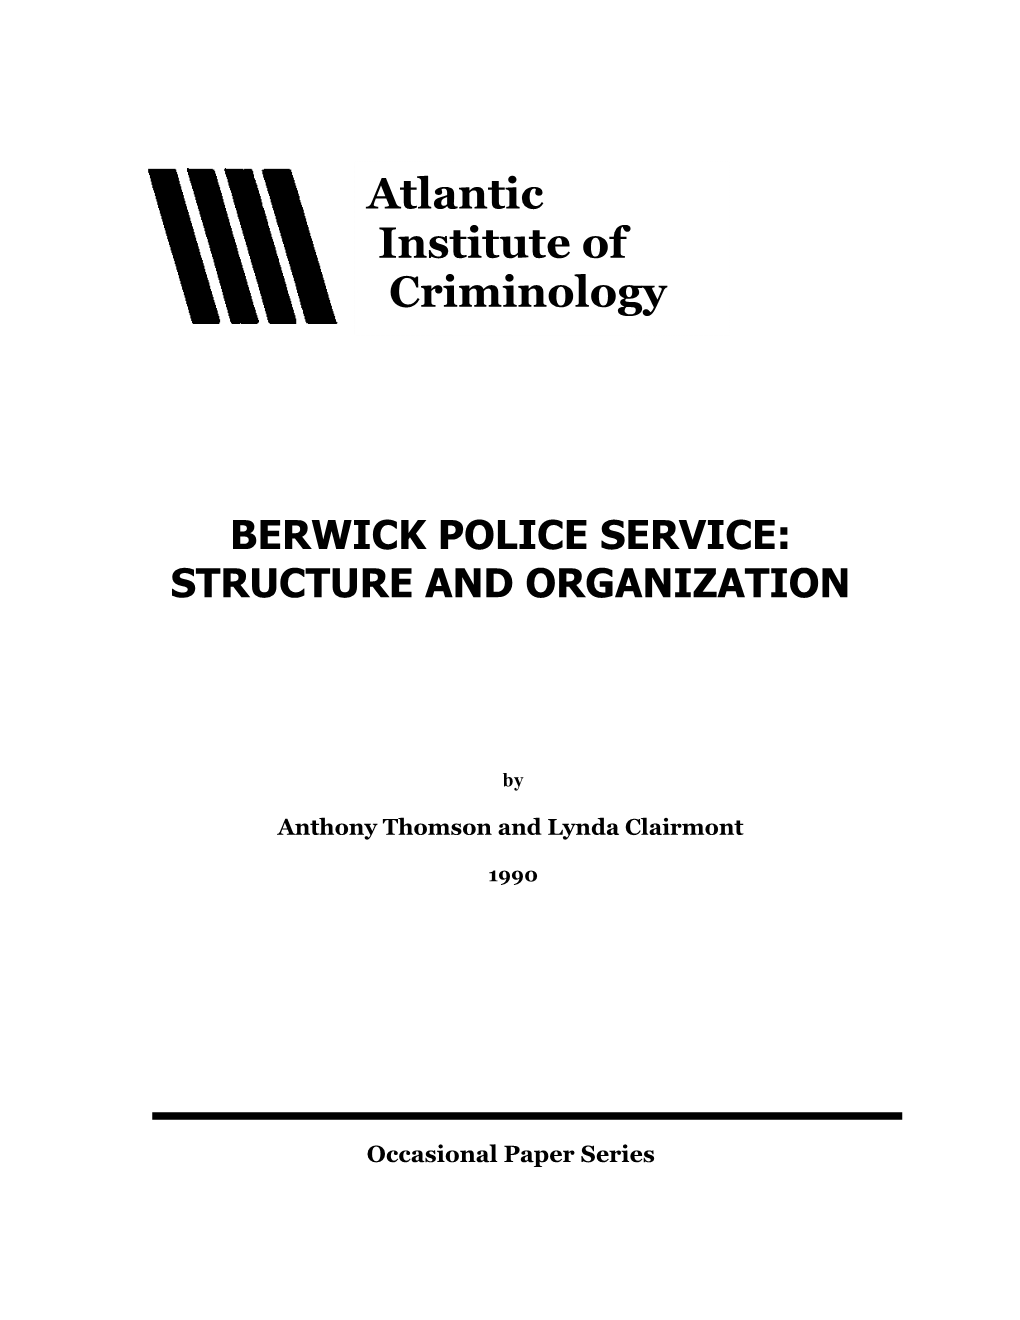 Berwick Was Described by Officers As, Usually, ―A Very Slow Town‖ in Terms of Crime